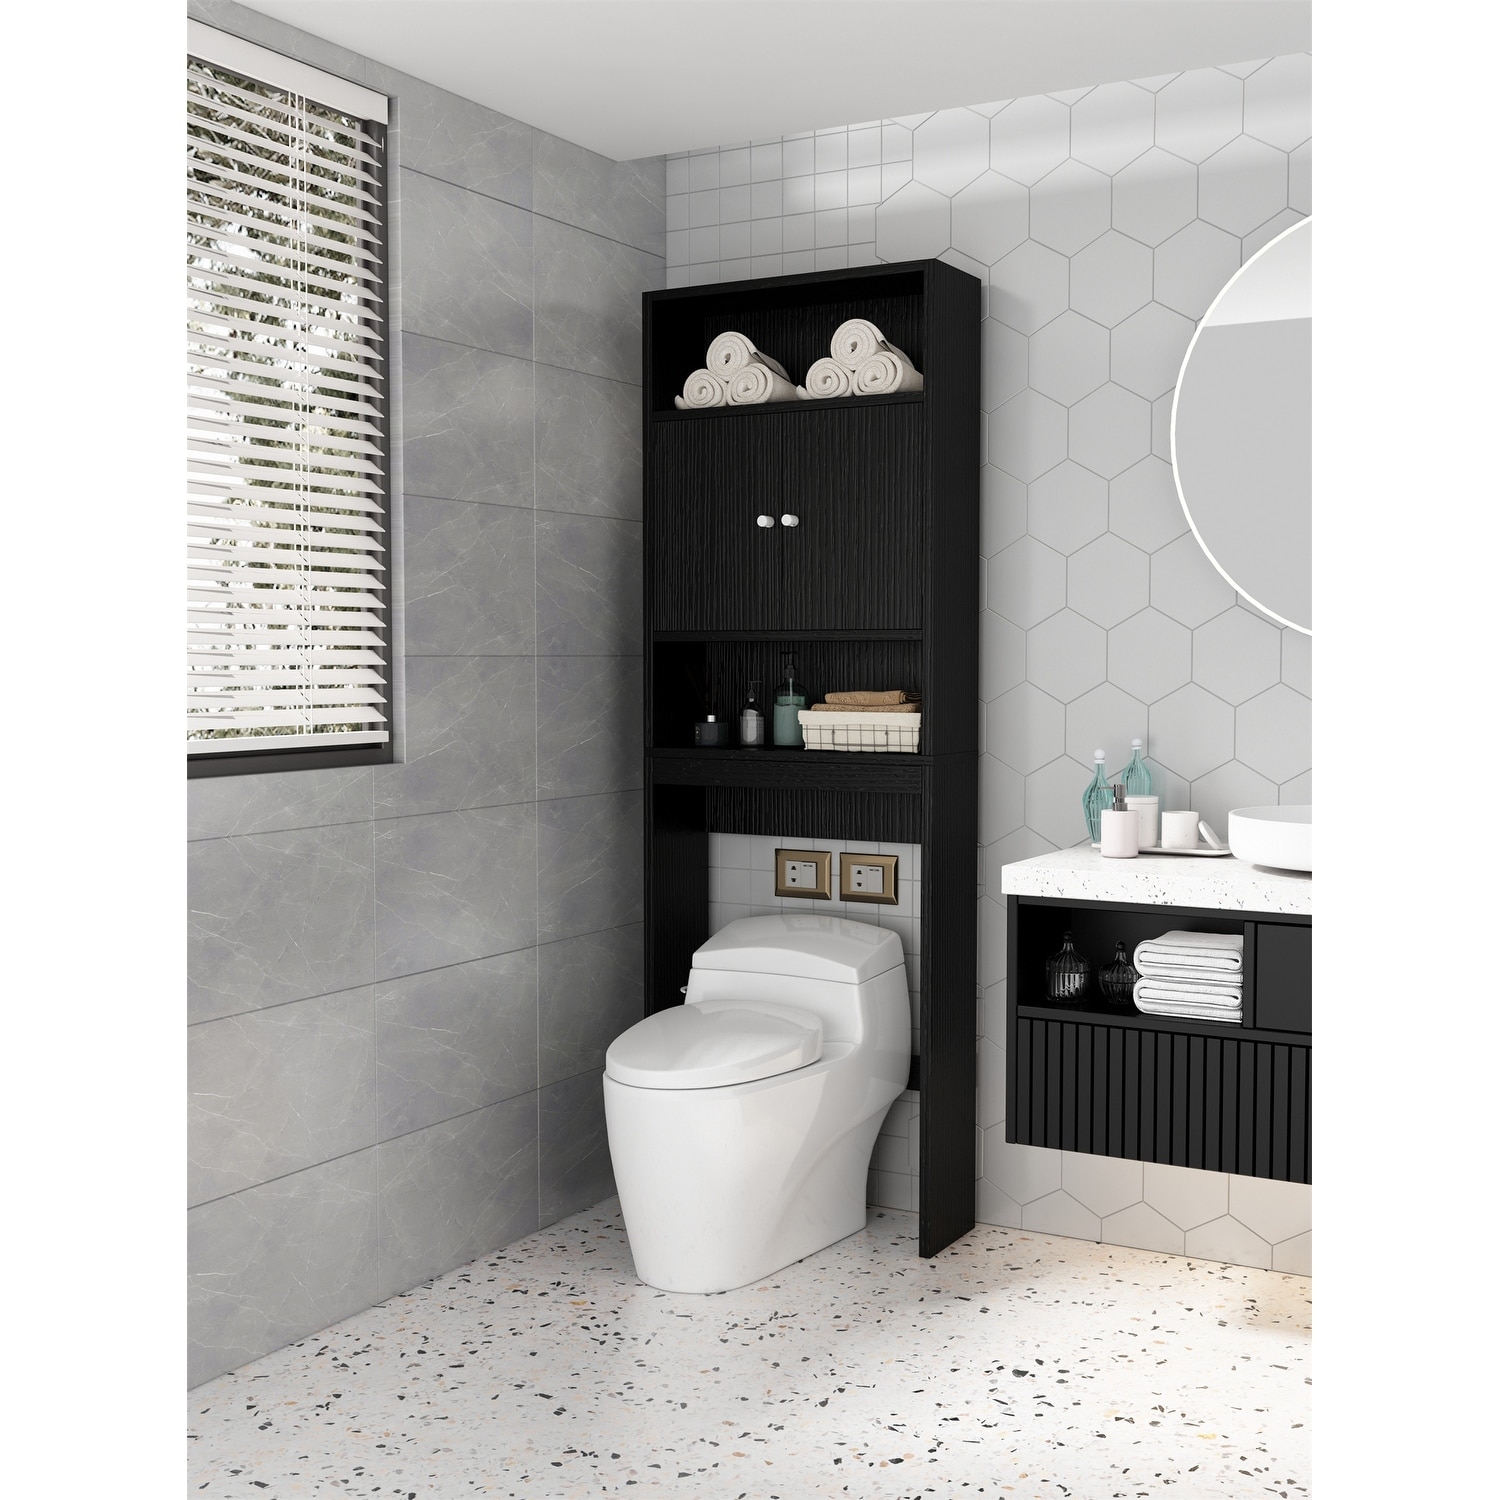 https://ak1.ostkcdn.com/images/products/is/images/direct/09185c82a91b8acfdd689419bb0e84e1043d84a5/Bathroom-Shelf-Accent-Cabinet-Toilet-Standing-Cabinet-with-2-Door%2C-Gap-Storage-Rack-Side-Storage-Organizer-Paper-Holder.jpg